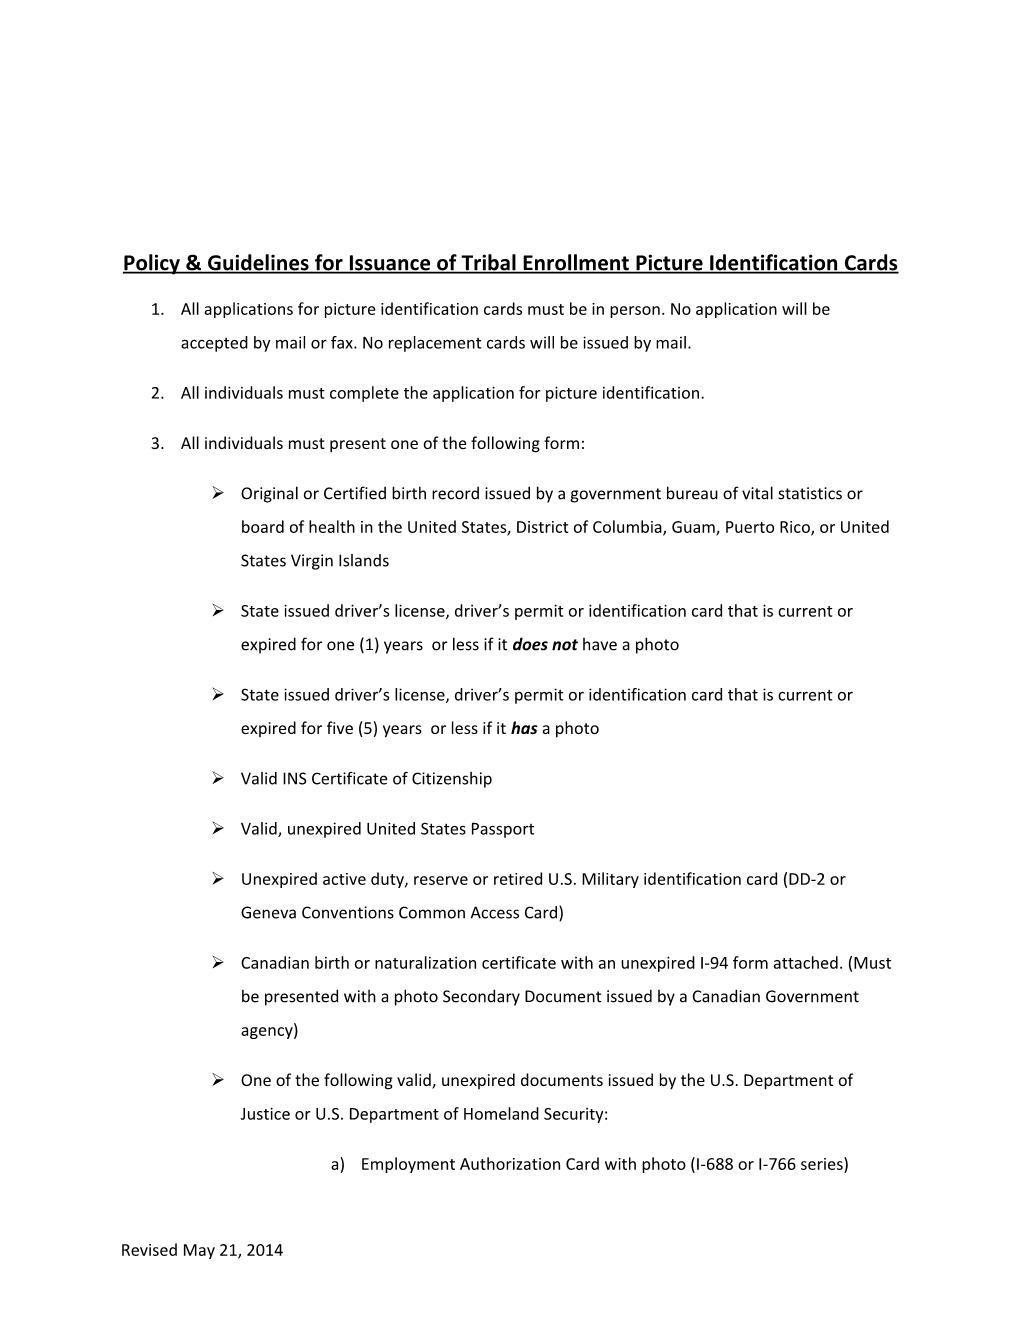 Policy & Guidelines for Issuance of Tribal Enrollment Picture Identification Cards